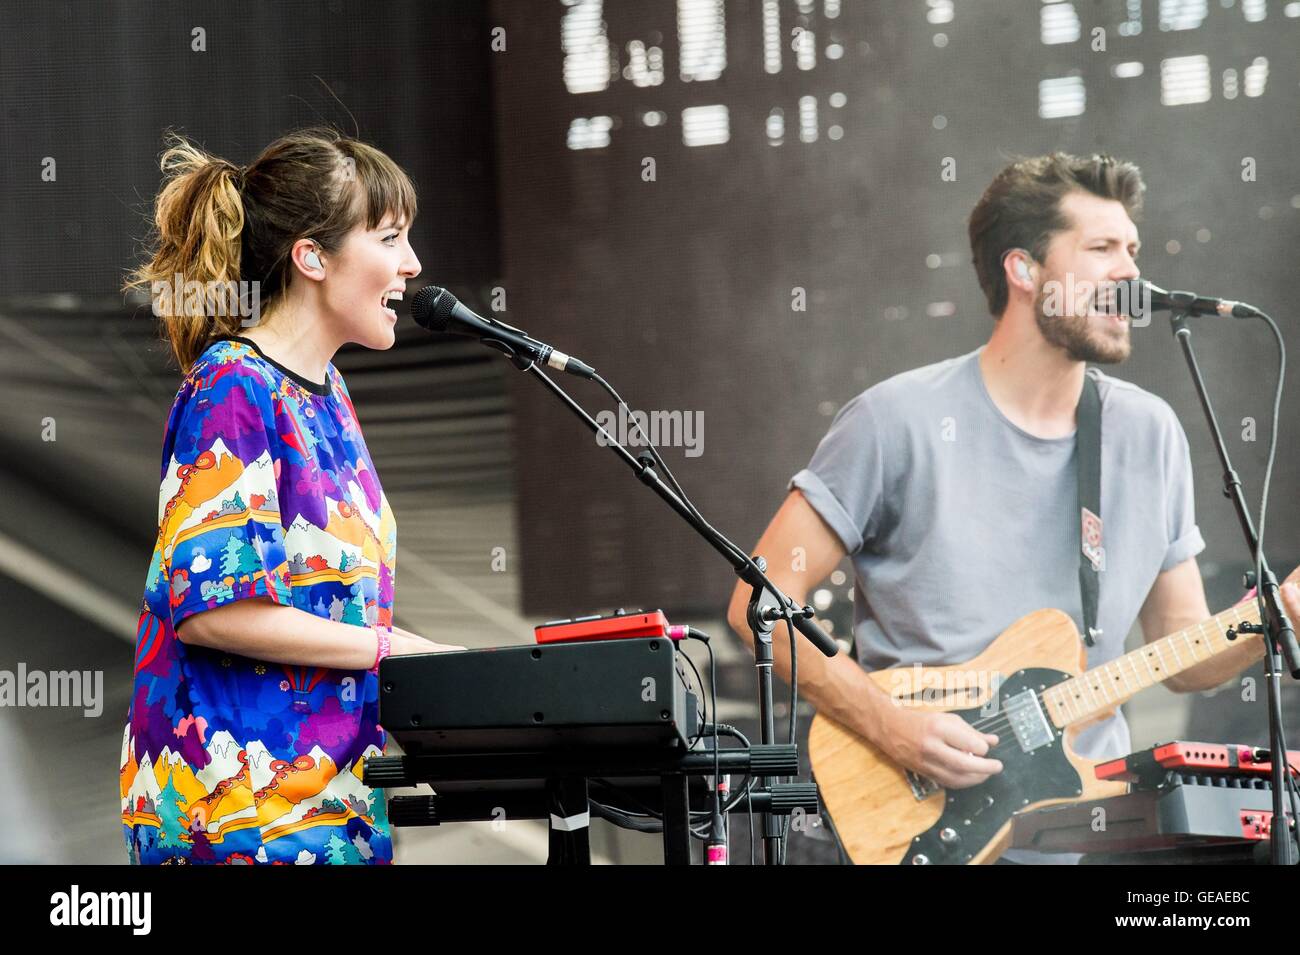 New York, NY, USA. 23rd July, 2016. Josephine Vander Gucht, Anthony West, Oh Wonder on stage for Panorama Festival Presented by Goldenvoice - SAT, Randall's Island Park, New York, NY July 23, 2016. © Steven Ferdman/Everett Collection/Alamy Live News Stock Photo